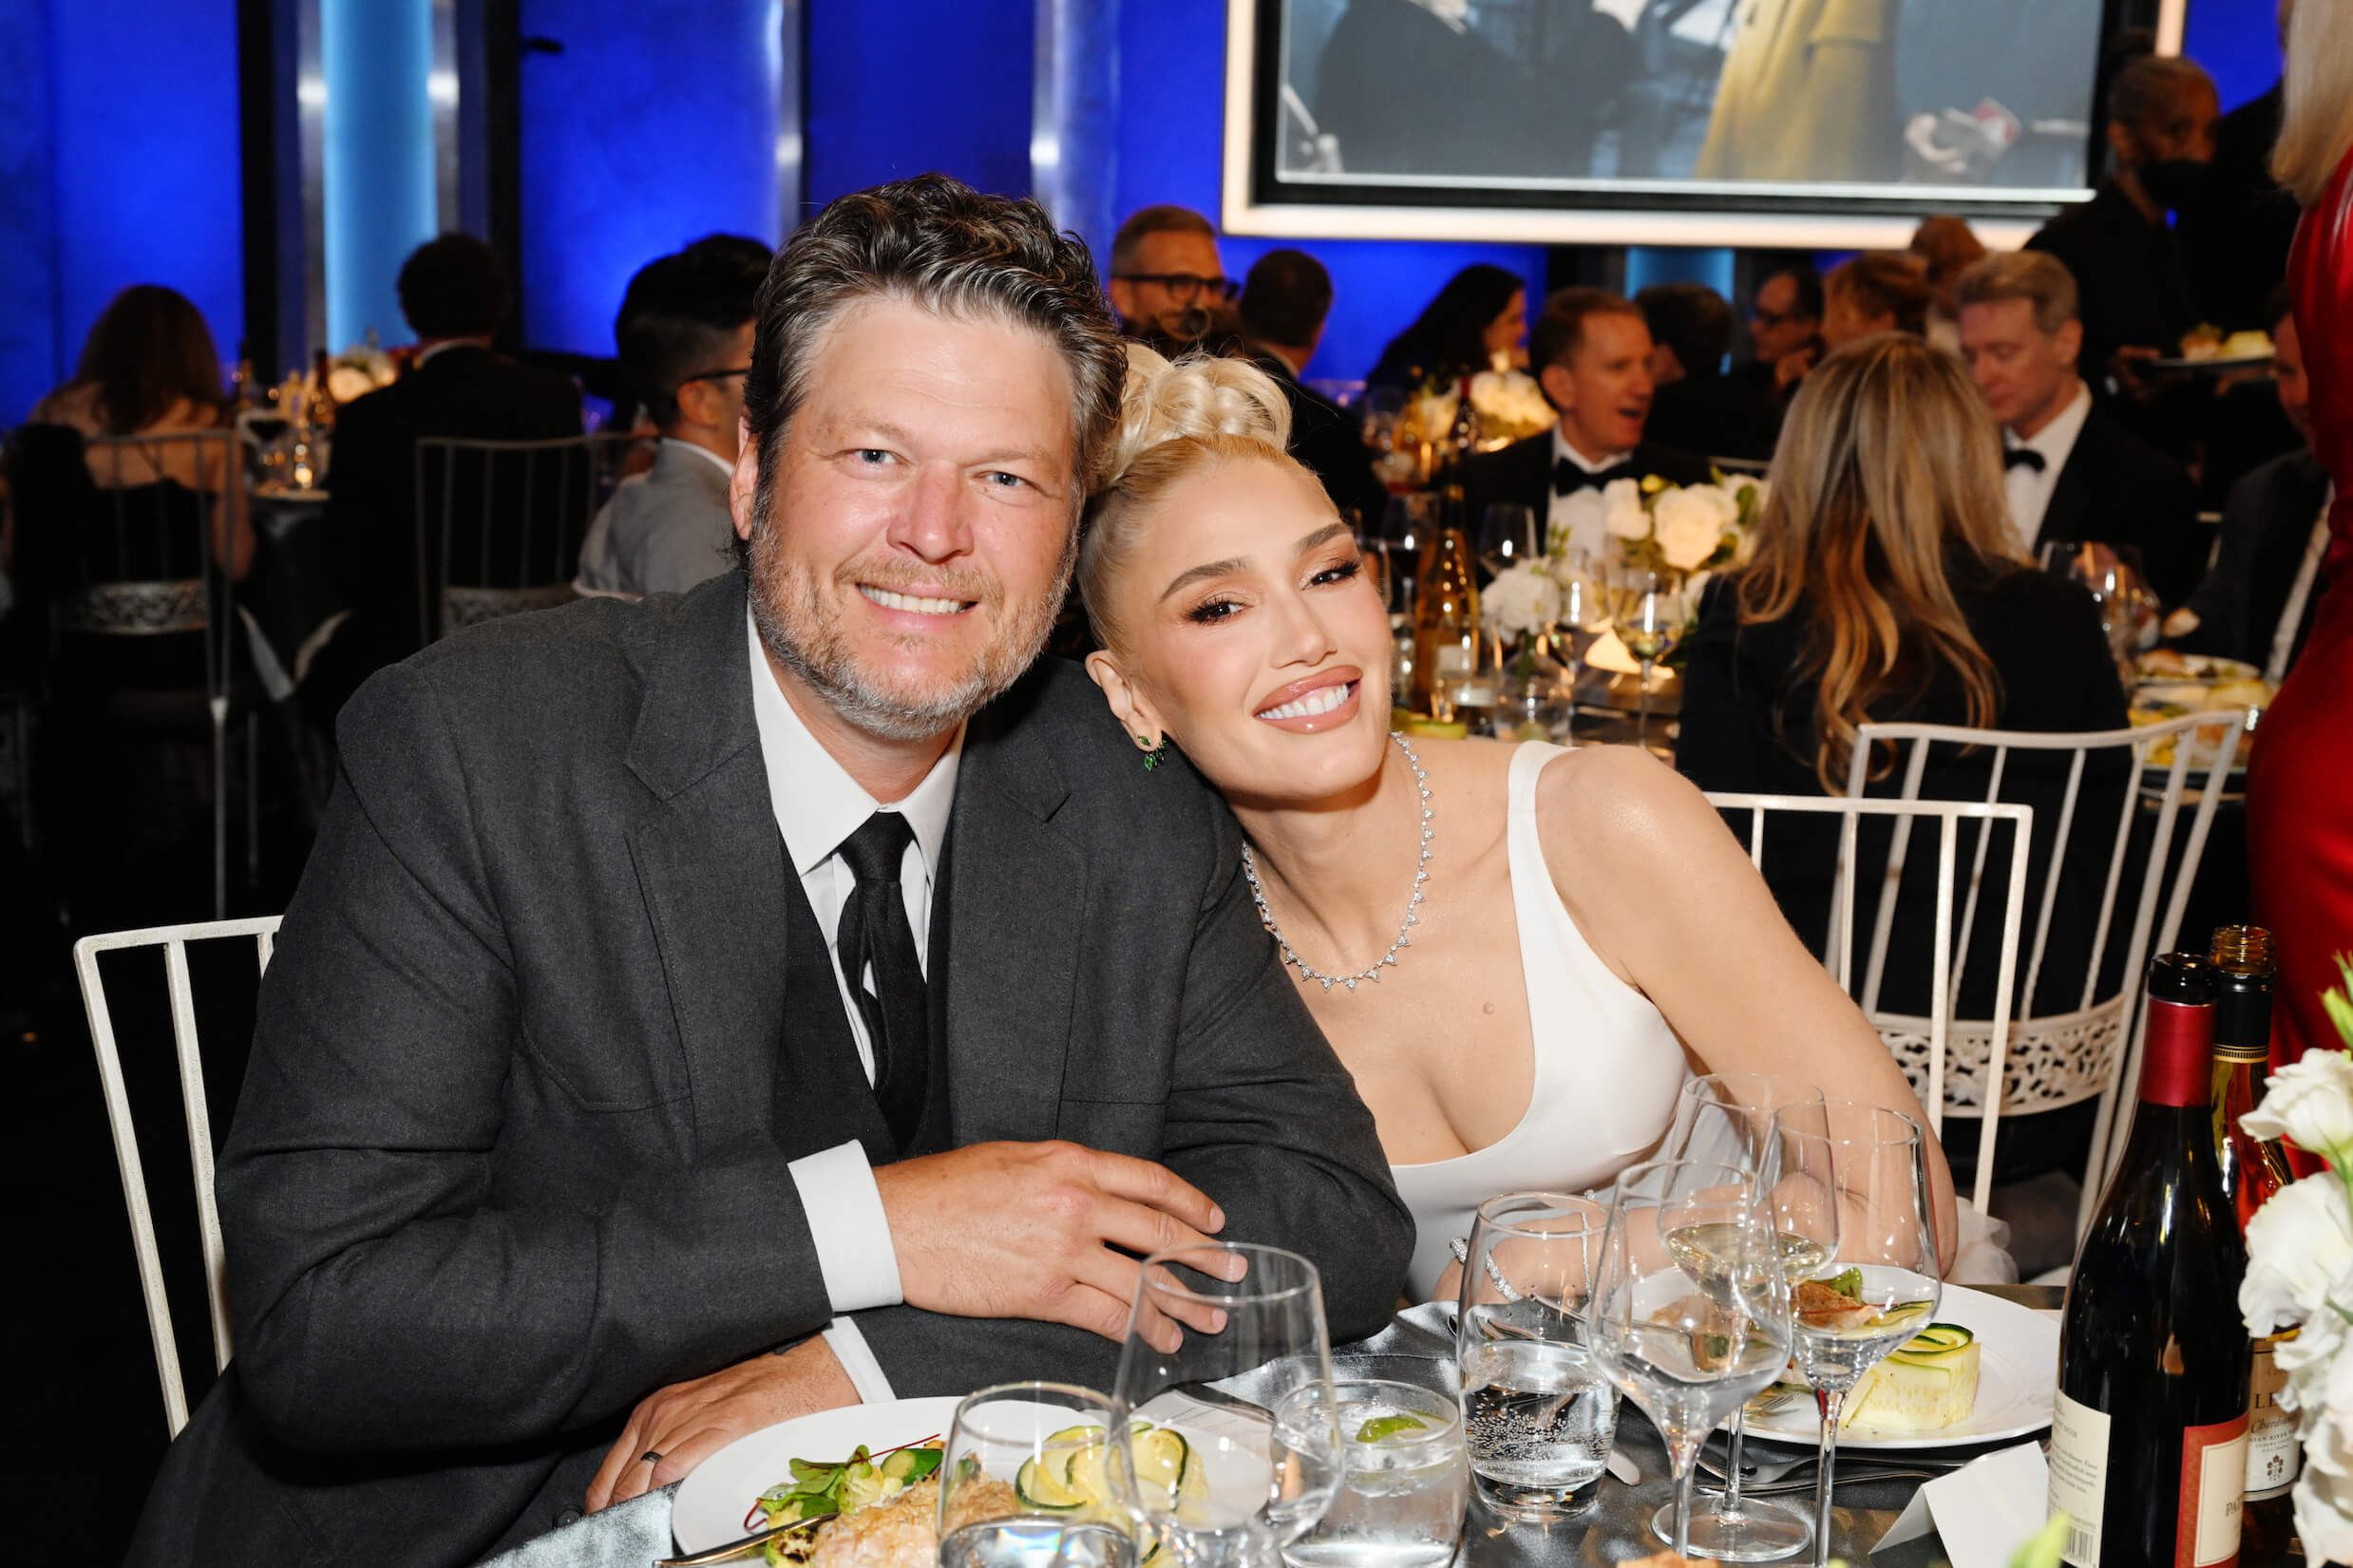 Gwen Stefani smiling and leaning her head against Blake Shelton's shoulder at the 48th AFI Life Achievement Award Gala Tribute